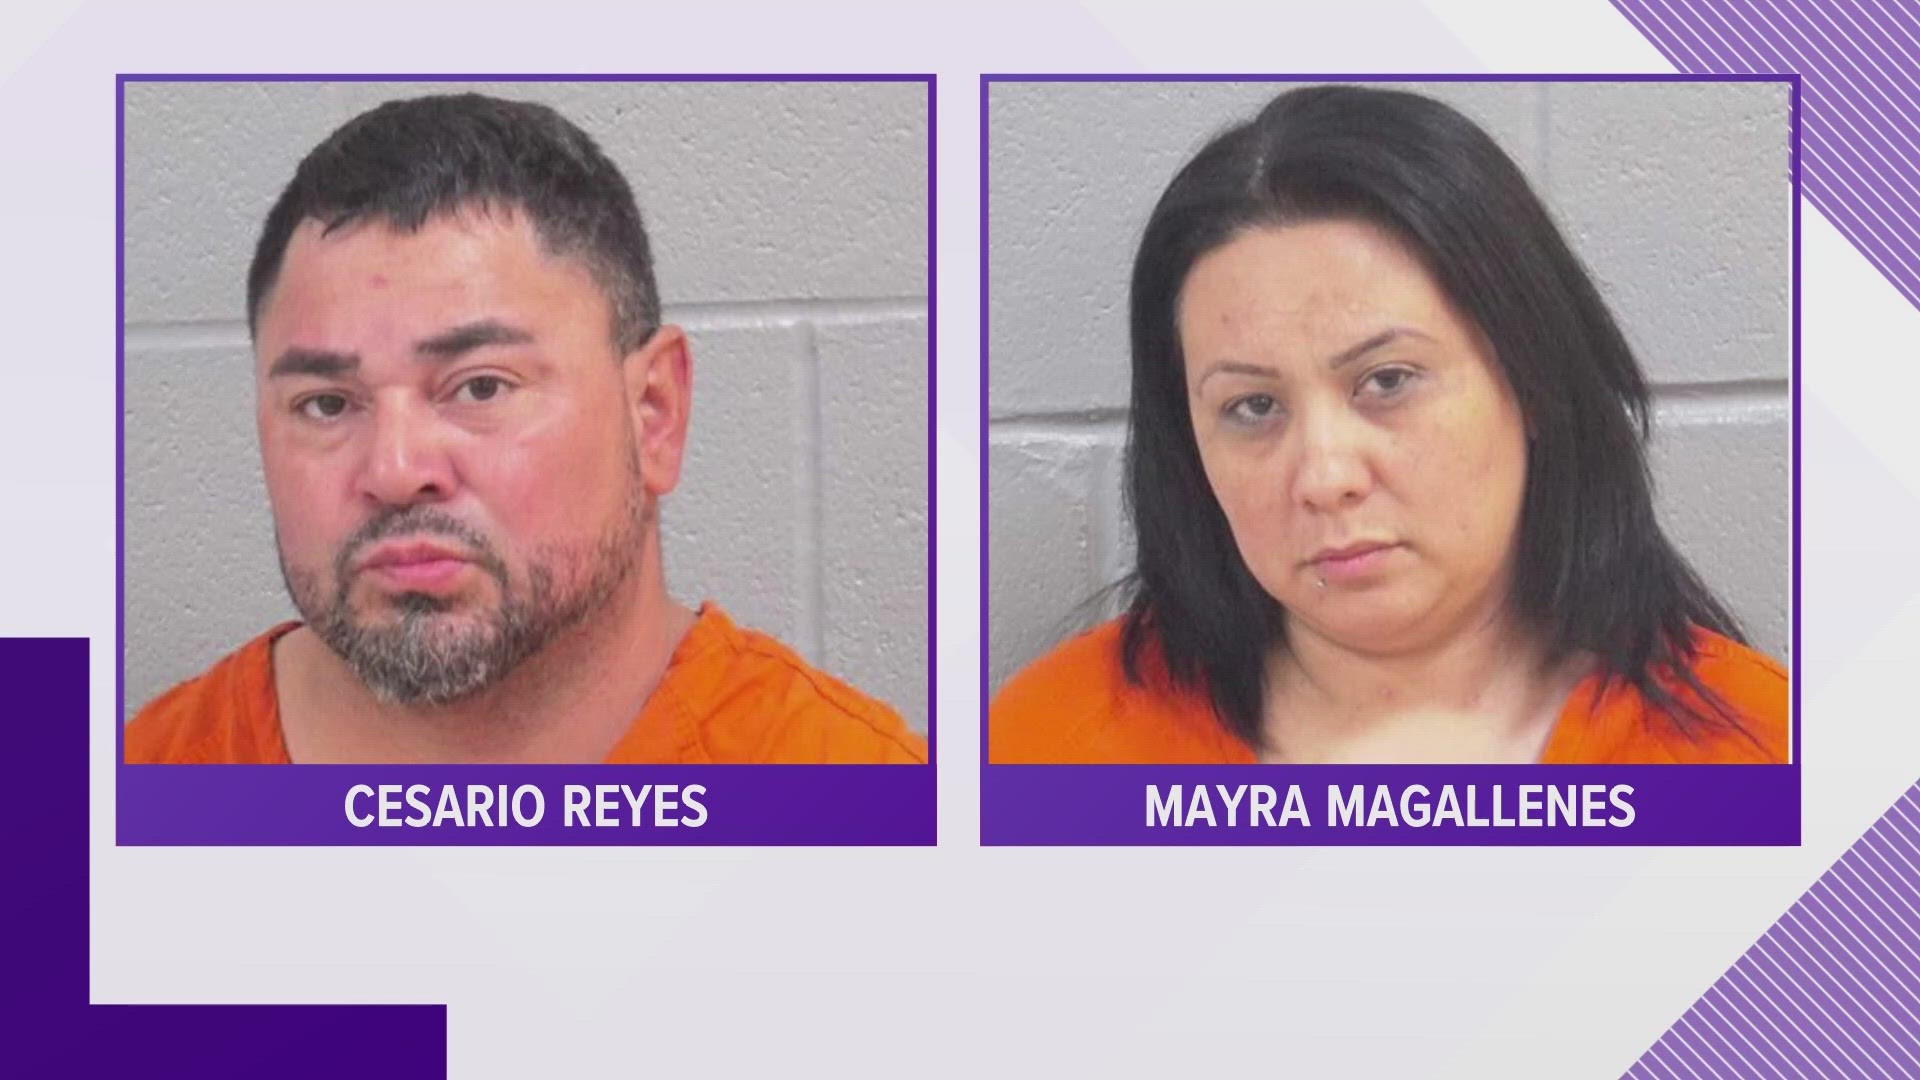 41-year-old Cesario Reyes was arrested for an "unlawful and feloniously engaging in sexual intercourse with a child under 14" warrant out of Seward County, Kansas.